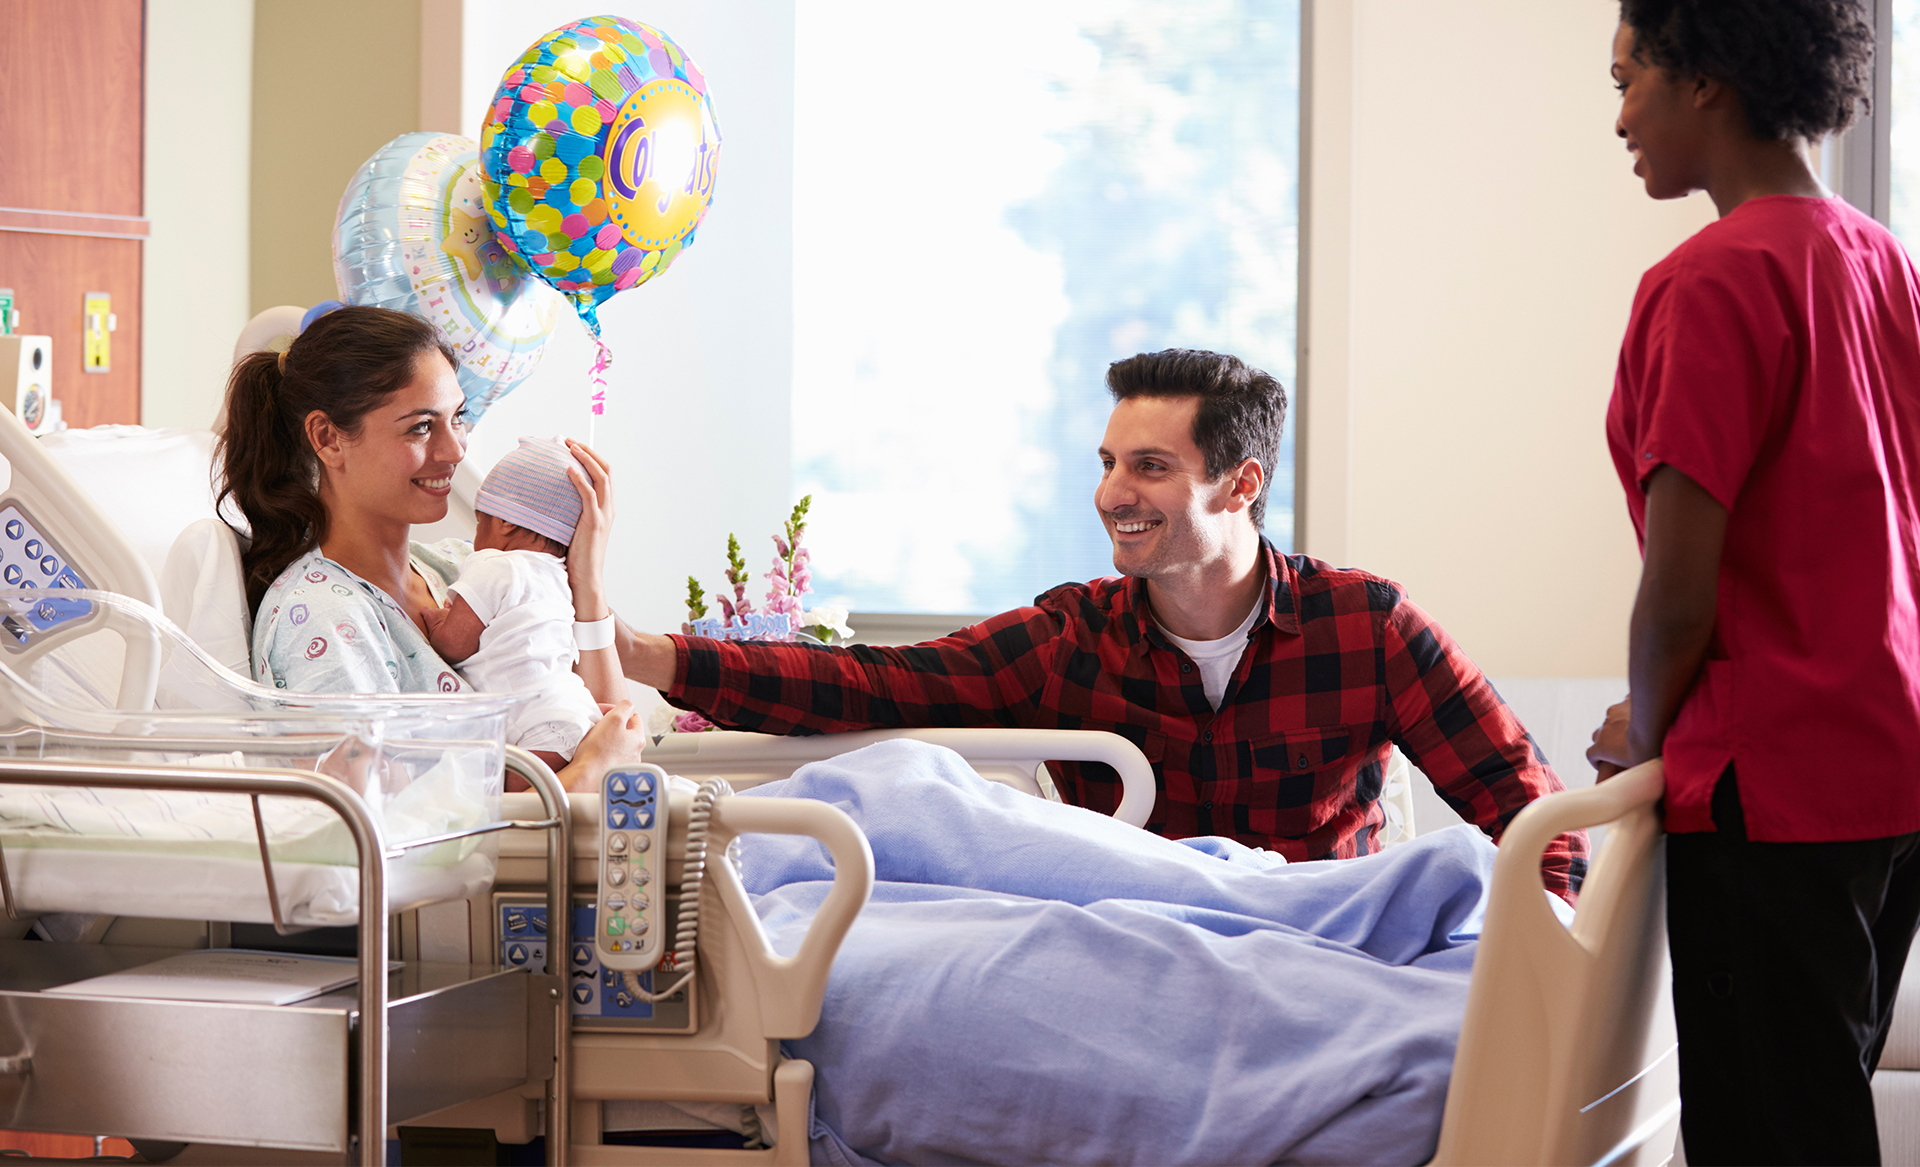 New parents with baby in hospital room